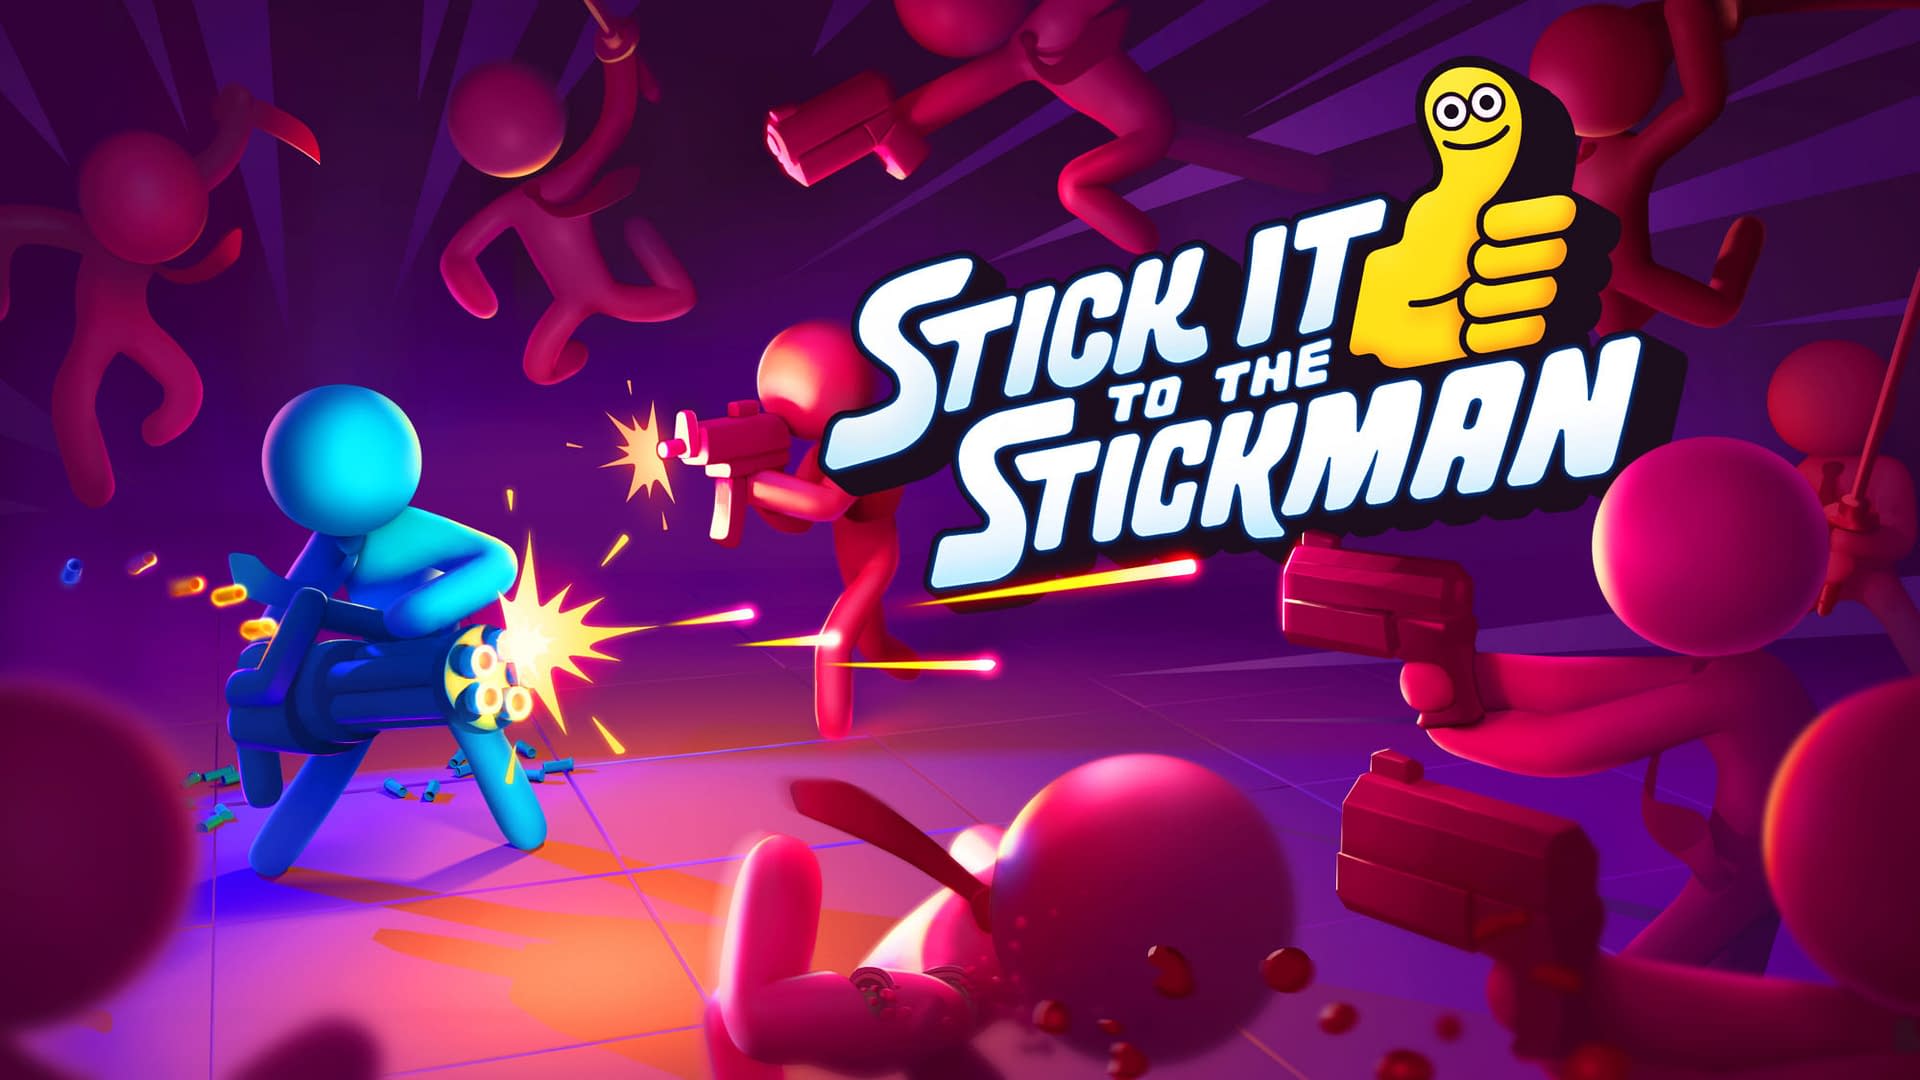 Epic stick fight (games), NFT Collection